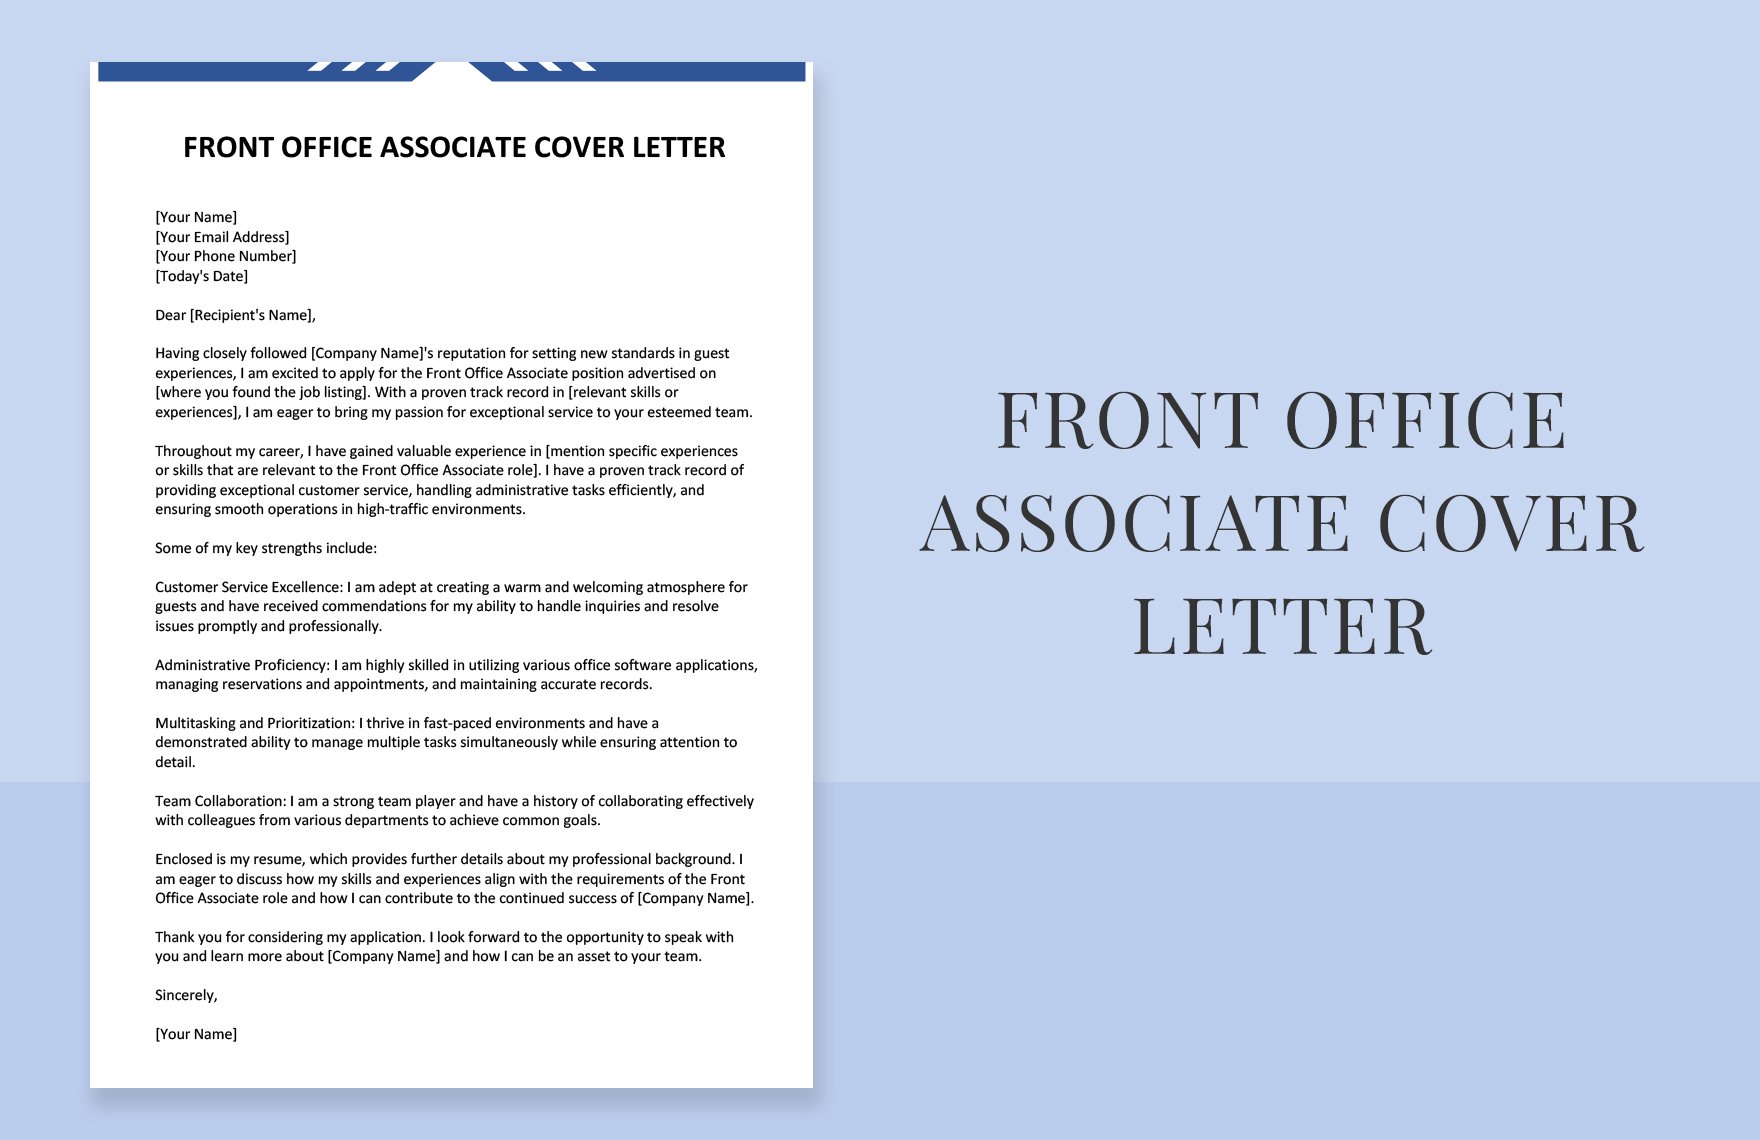 Front Office Associate Cover Letter